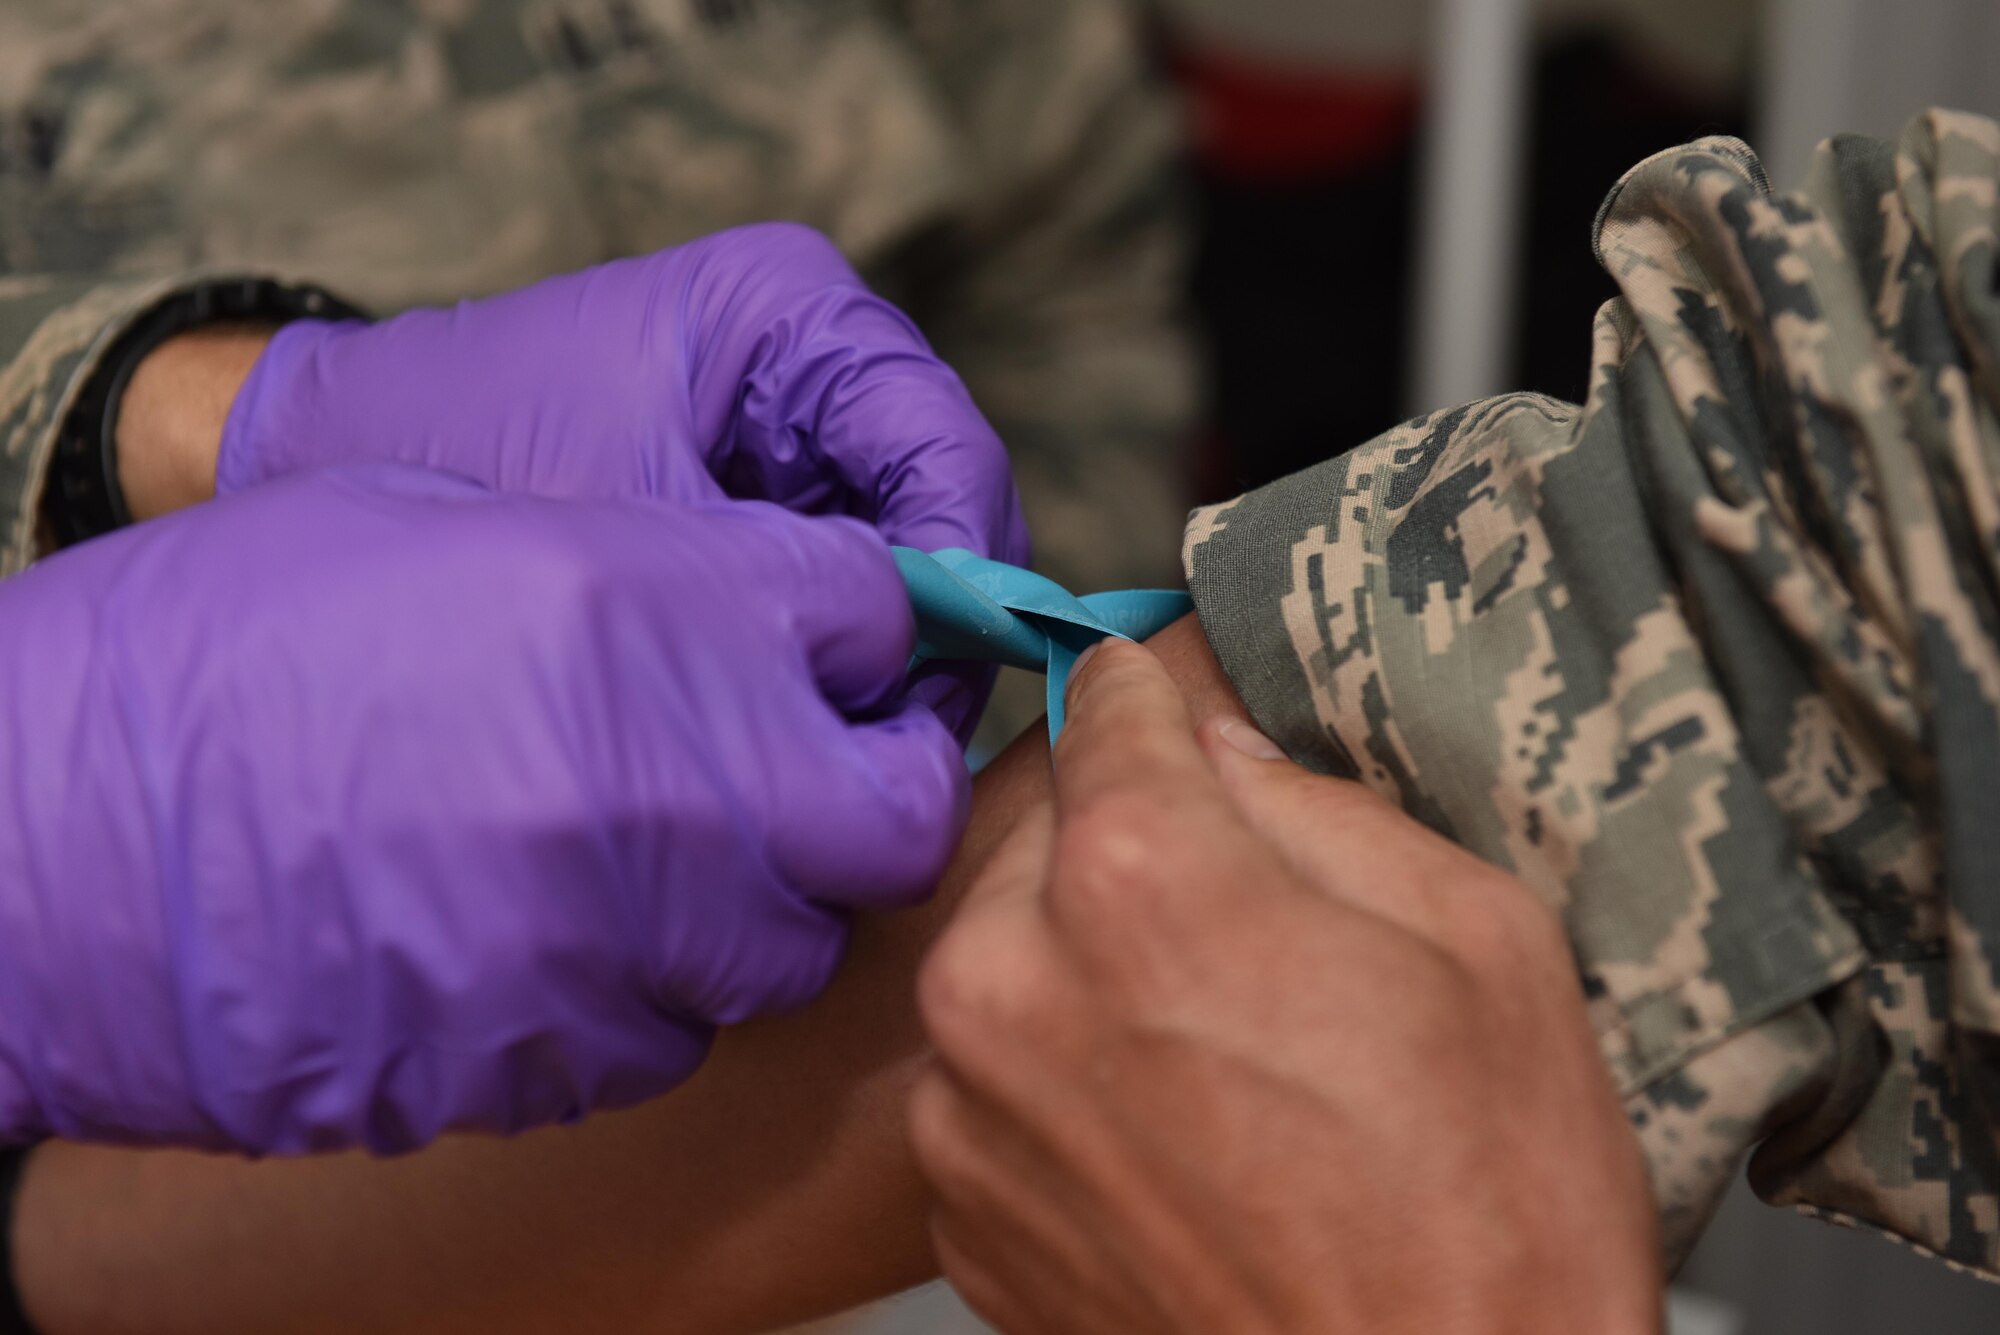 A U.S. Air Force Academy cadet practices tying a tourniquet on Tech. Sgt. Ryan Folks, 27th Expeditionary Fighter Squadron medical element, at an undisclosed location in Southwest Asia, July 6, 2017. Cadets visited the 380th Air Expeditionary Wing and embedded with multiple units across the installation to see firsthand how separate elements of the mission fit into the whole. (U.S. Air Force photo by Staff Sgt. Marjorie A. Bowlden)